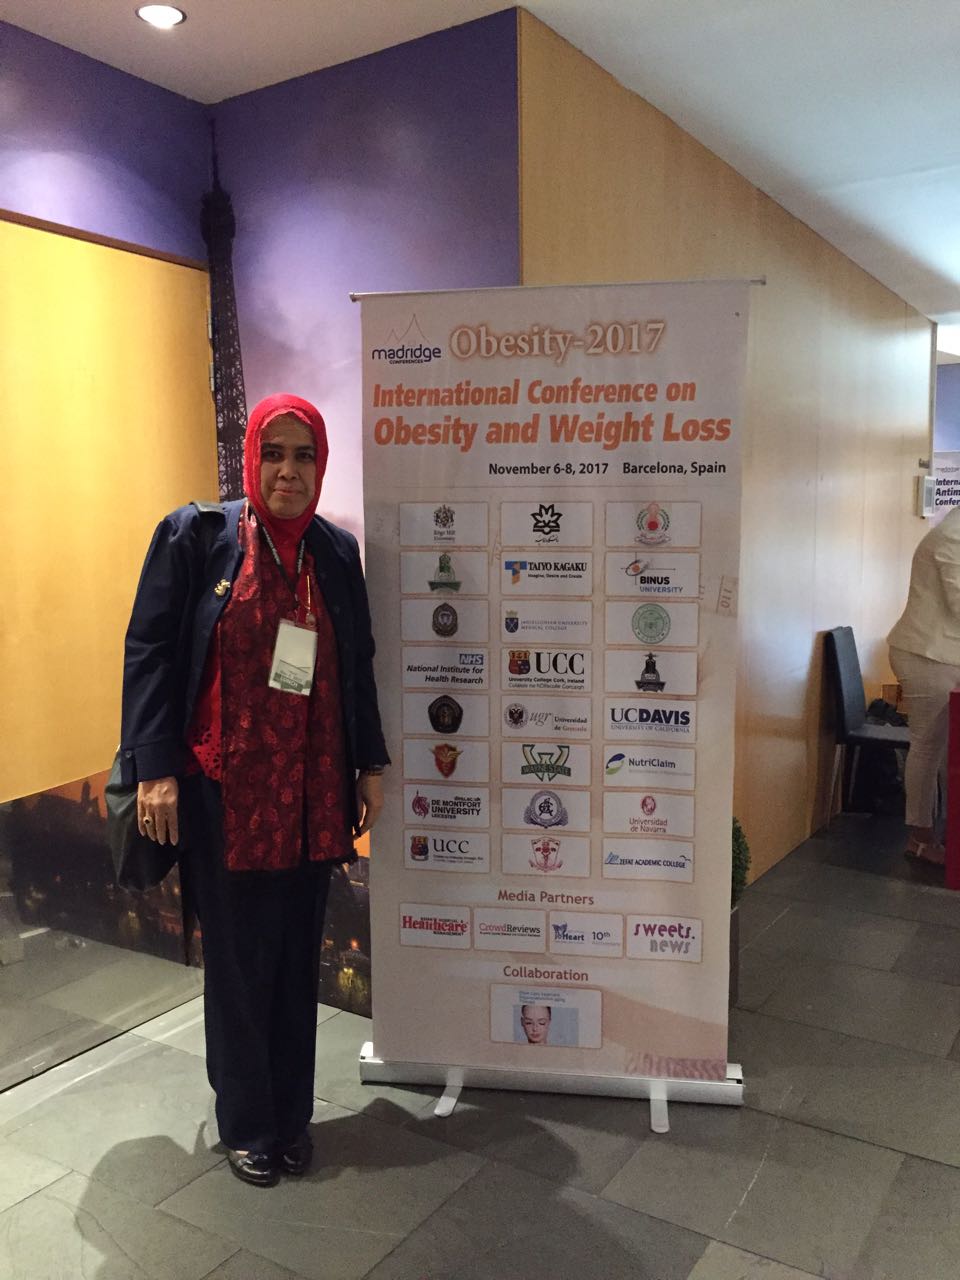 Prof. Fatchiyah, Chair of RC SMONAGENES as A Honorable Speaker in the International Conference on Obesity and Weight Loss